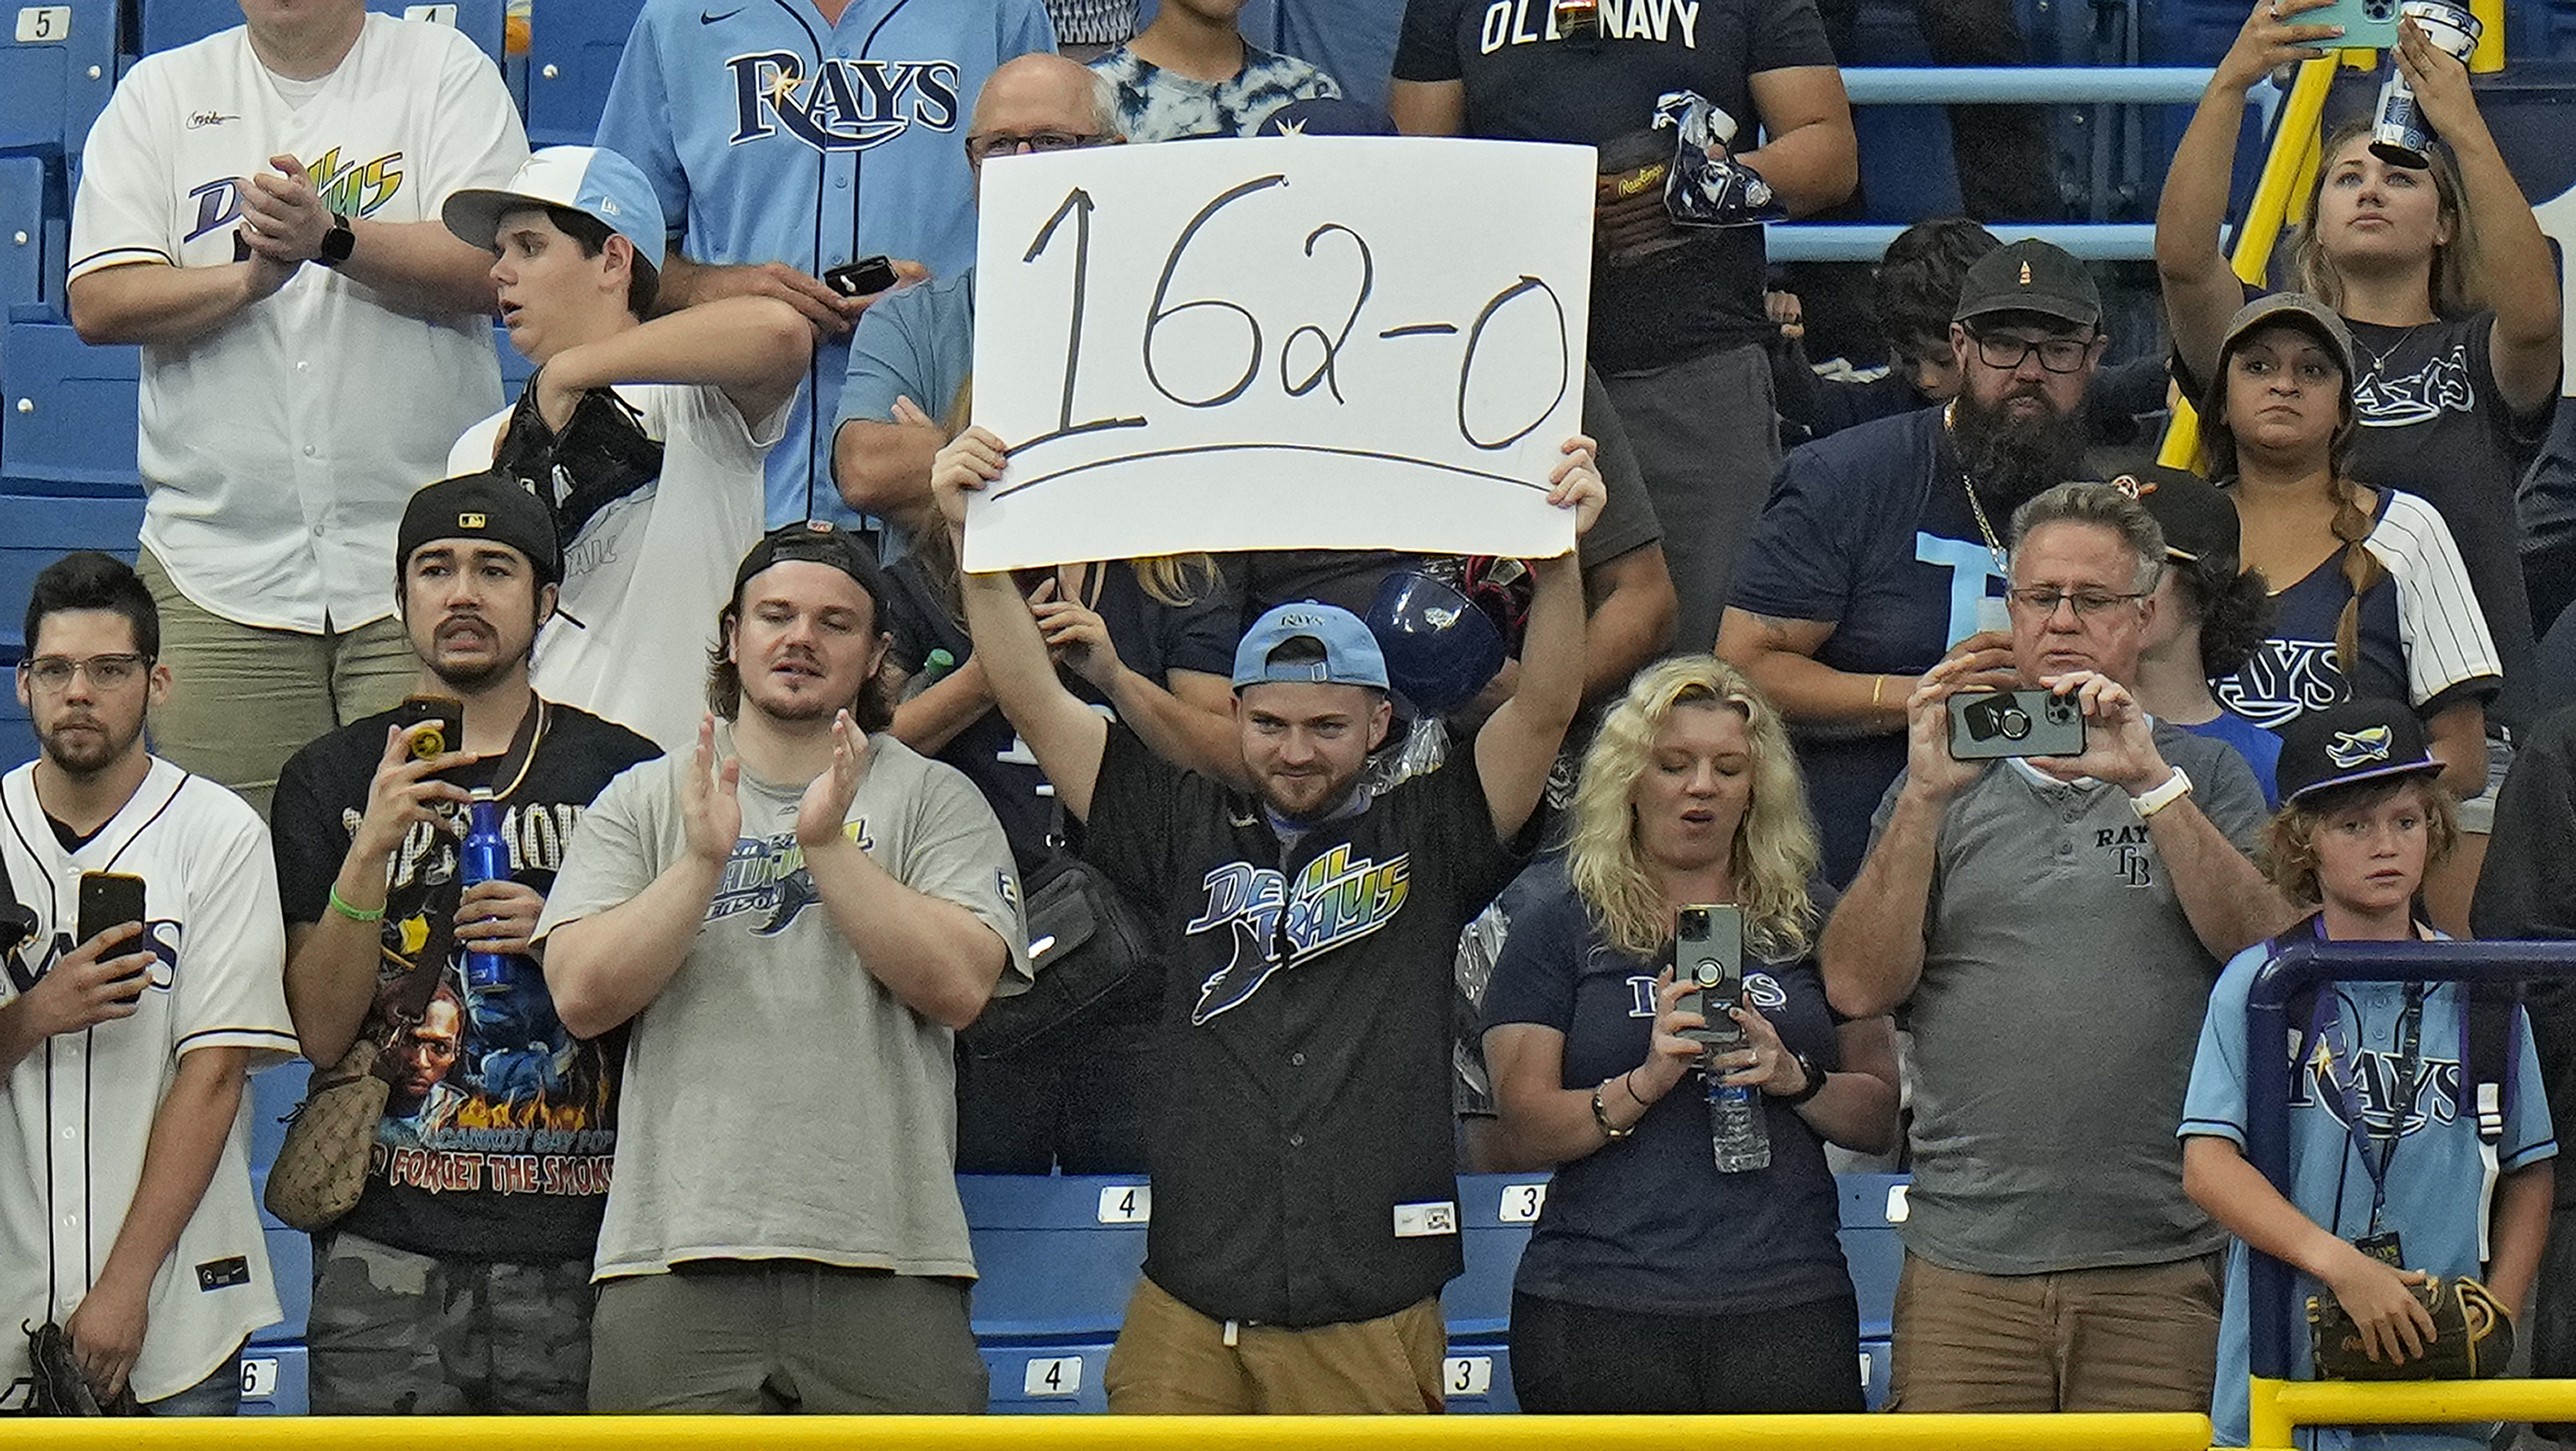 Fans of the Tampa Bay Rays